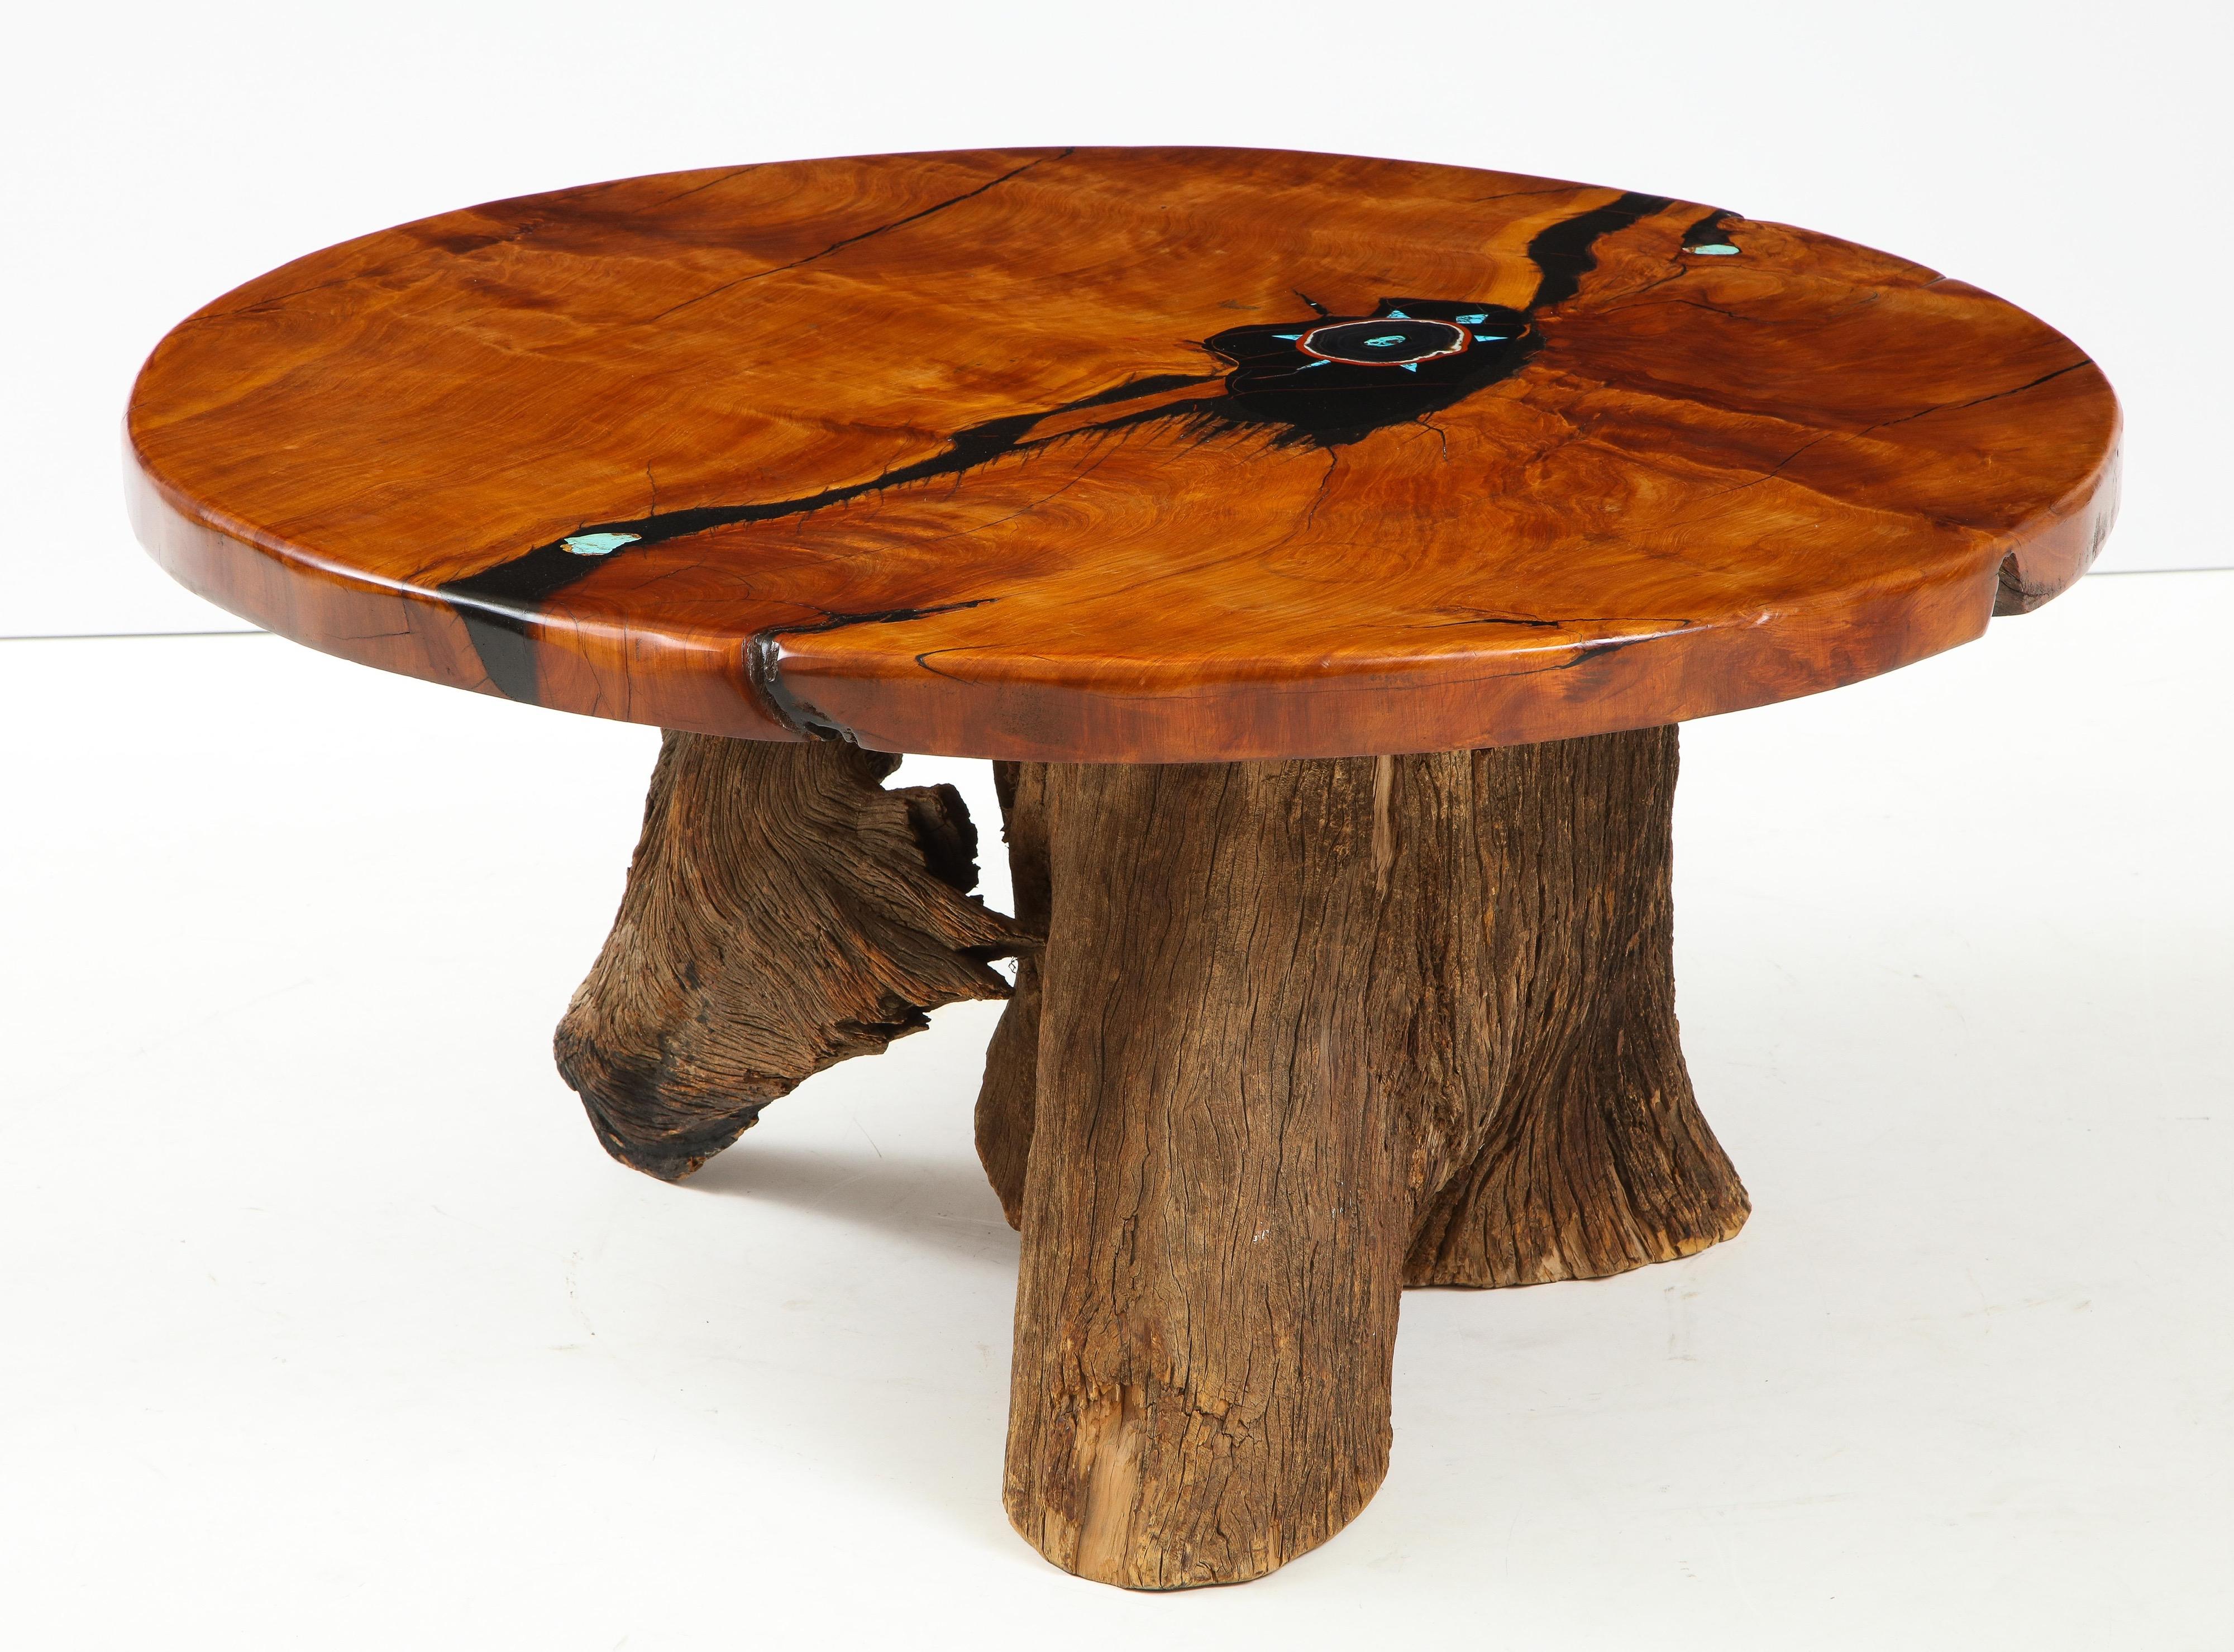 A unique hand crafted polished wood top with black resin inlay and turquoise stones. The top is able to rotate, Lazy Susan style. The base is a natural driftwood trunk.